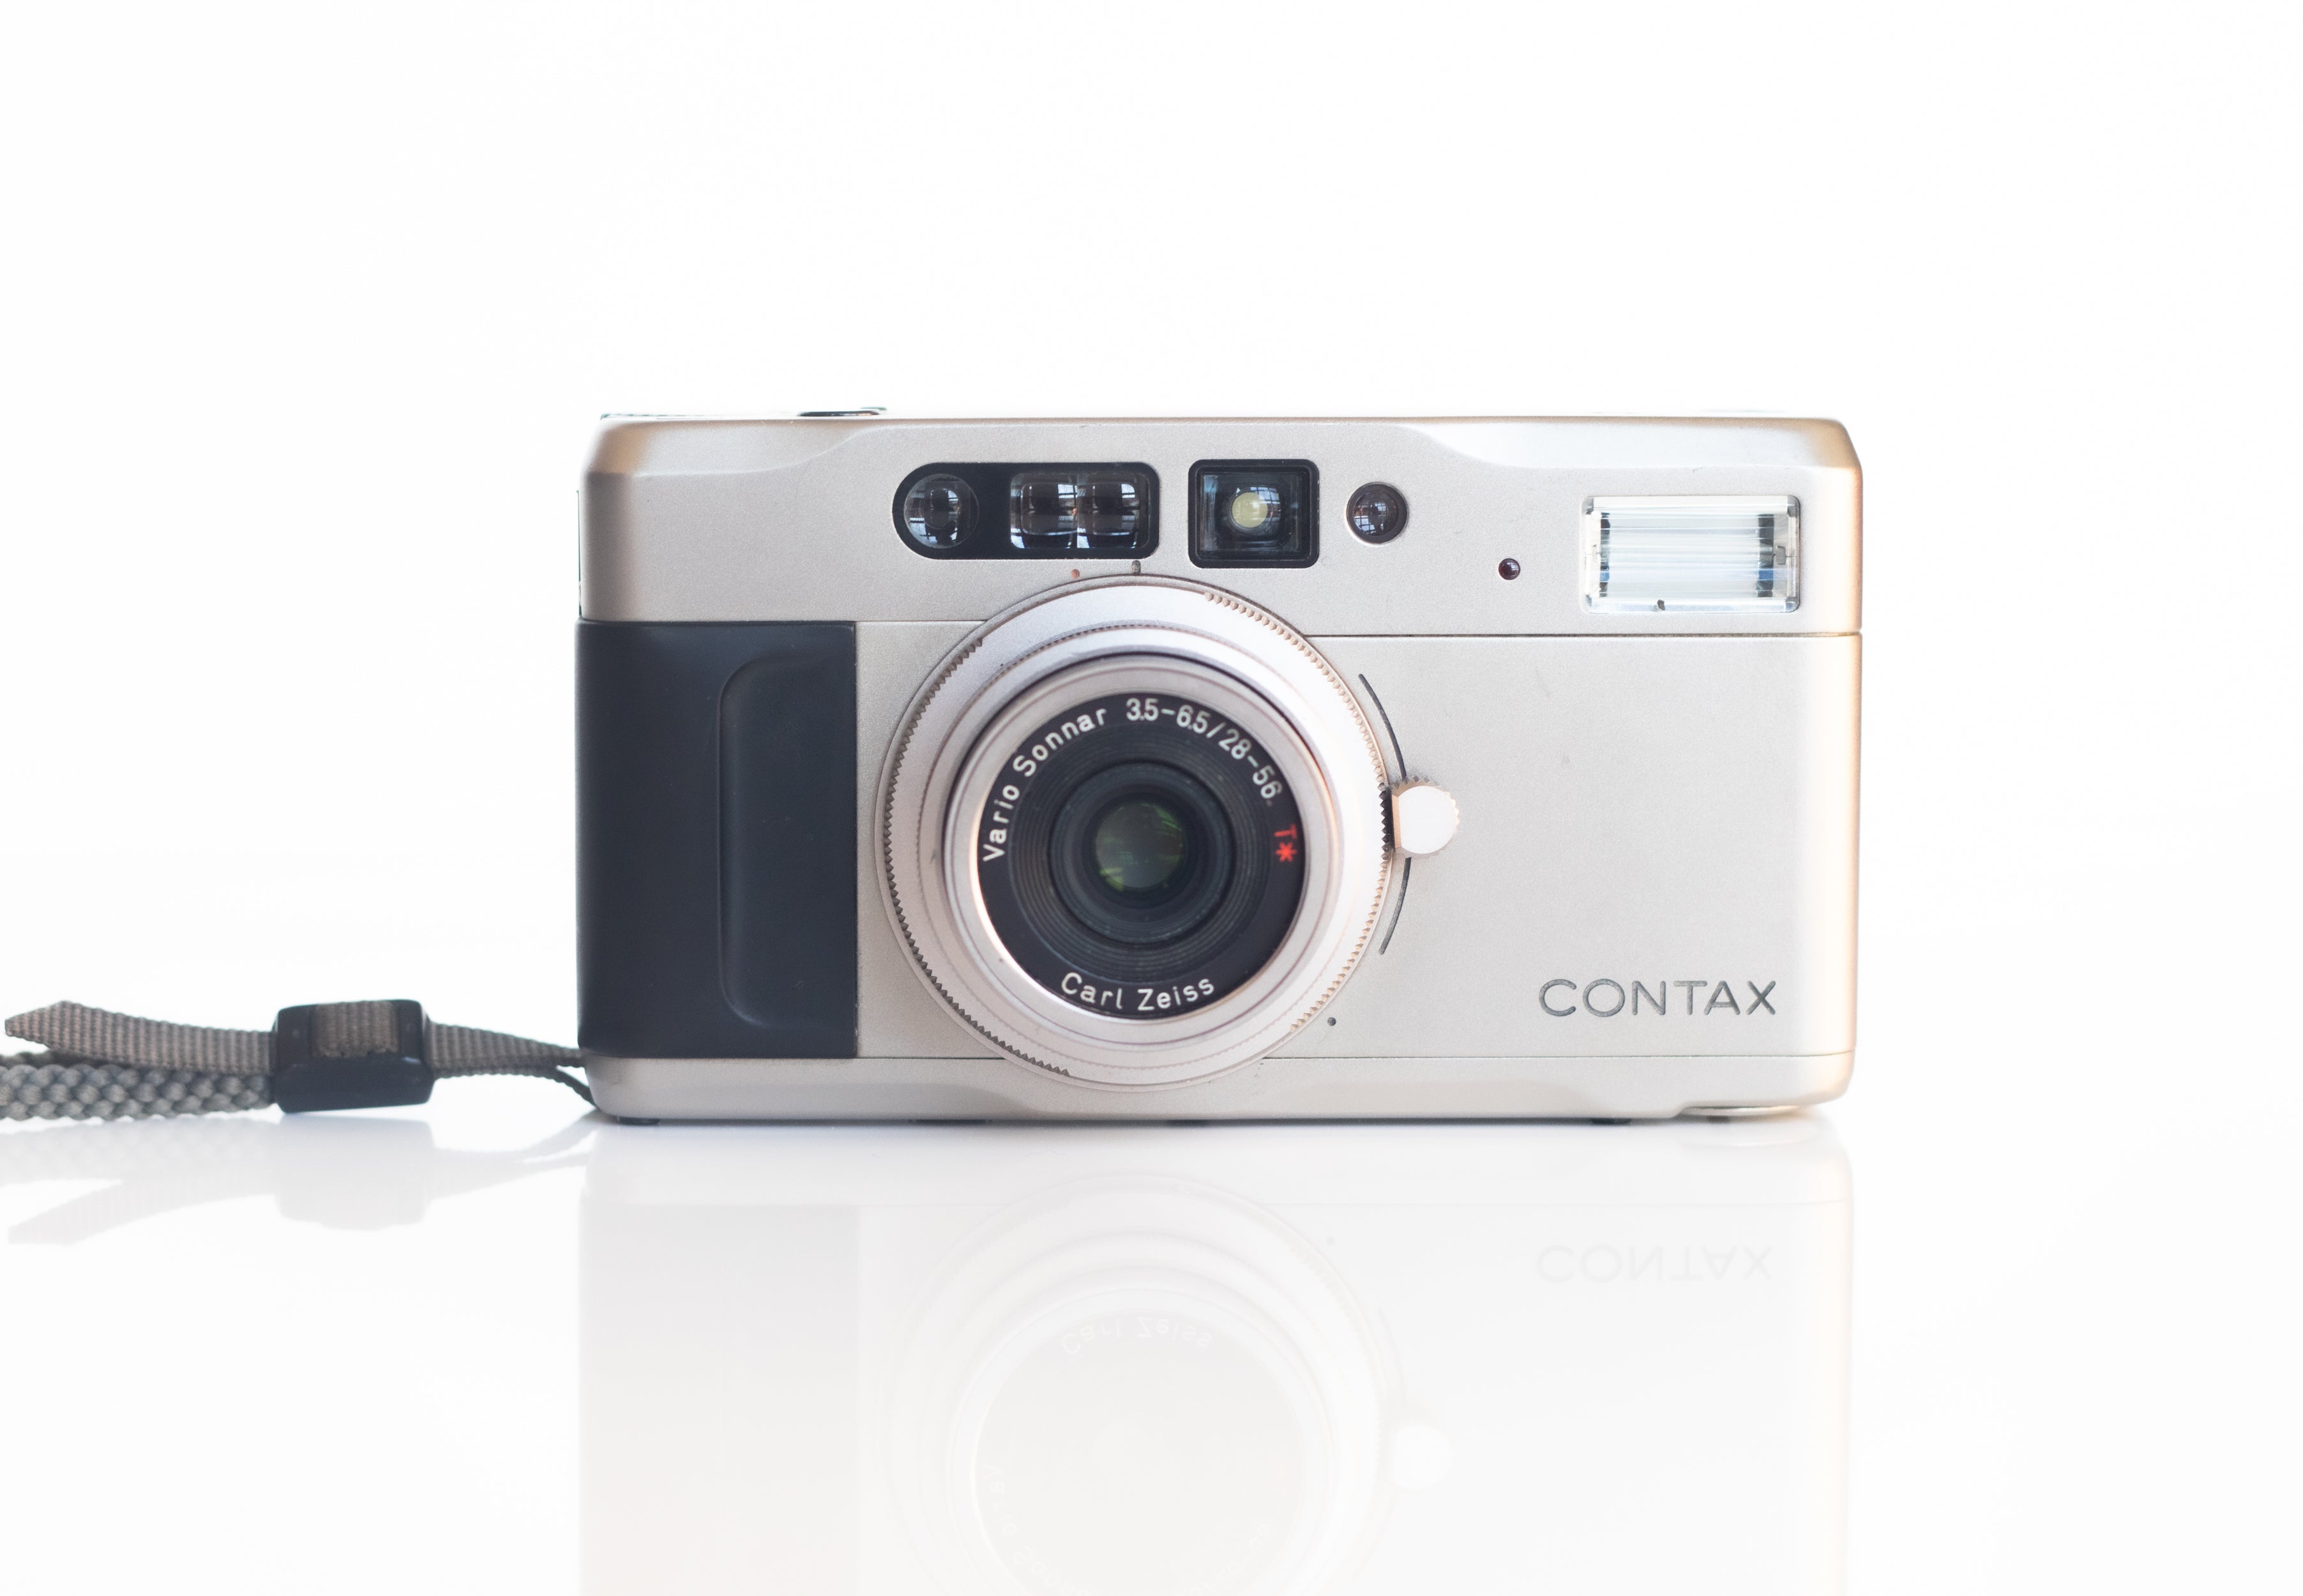 Contax TVS High End Point & Shoot | Sample Images | F3.5 Carl Zeiss T*